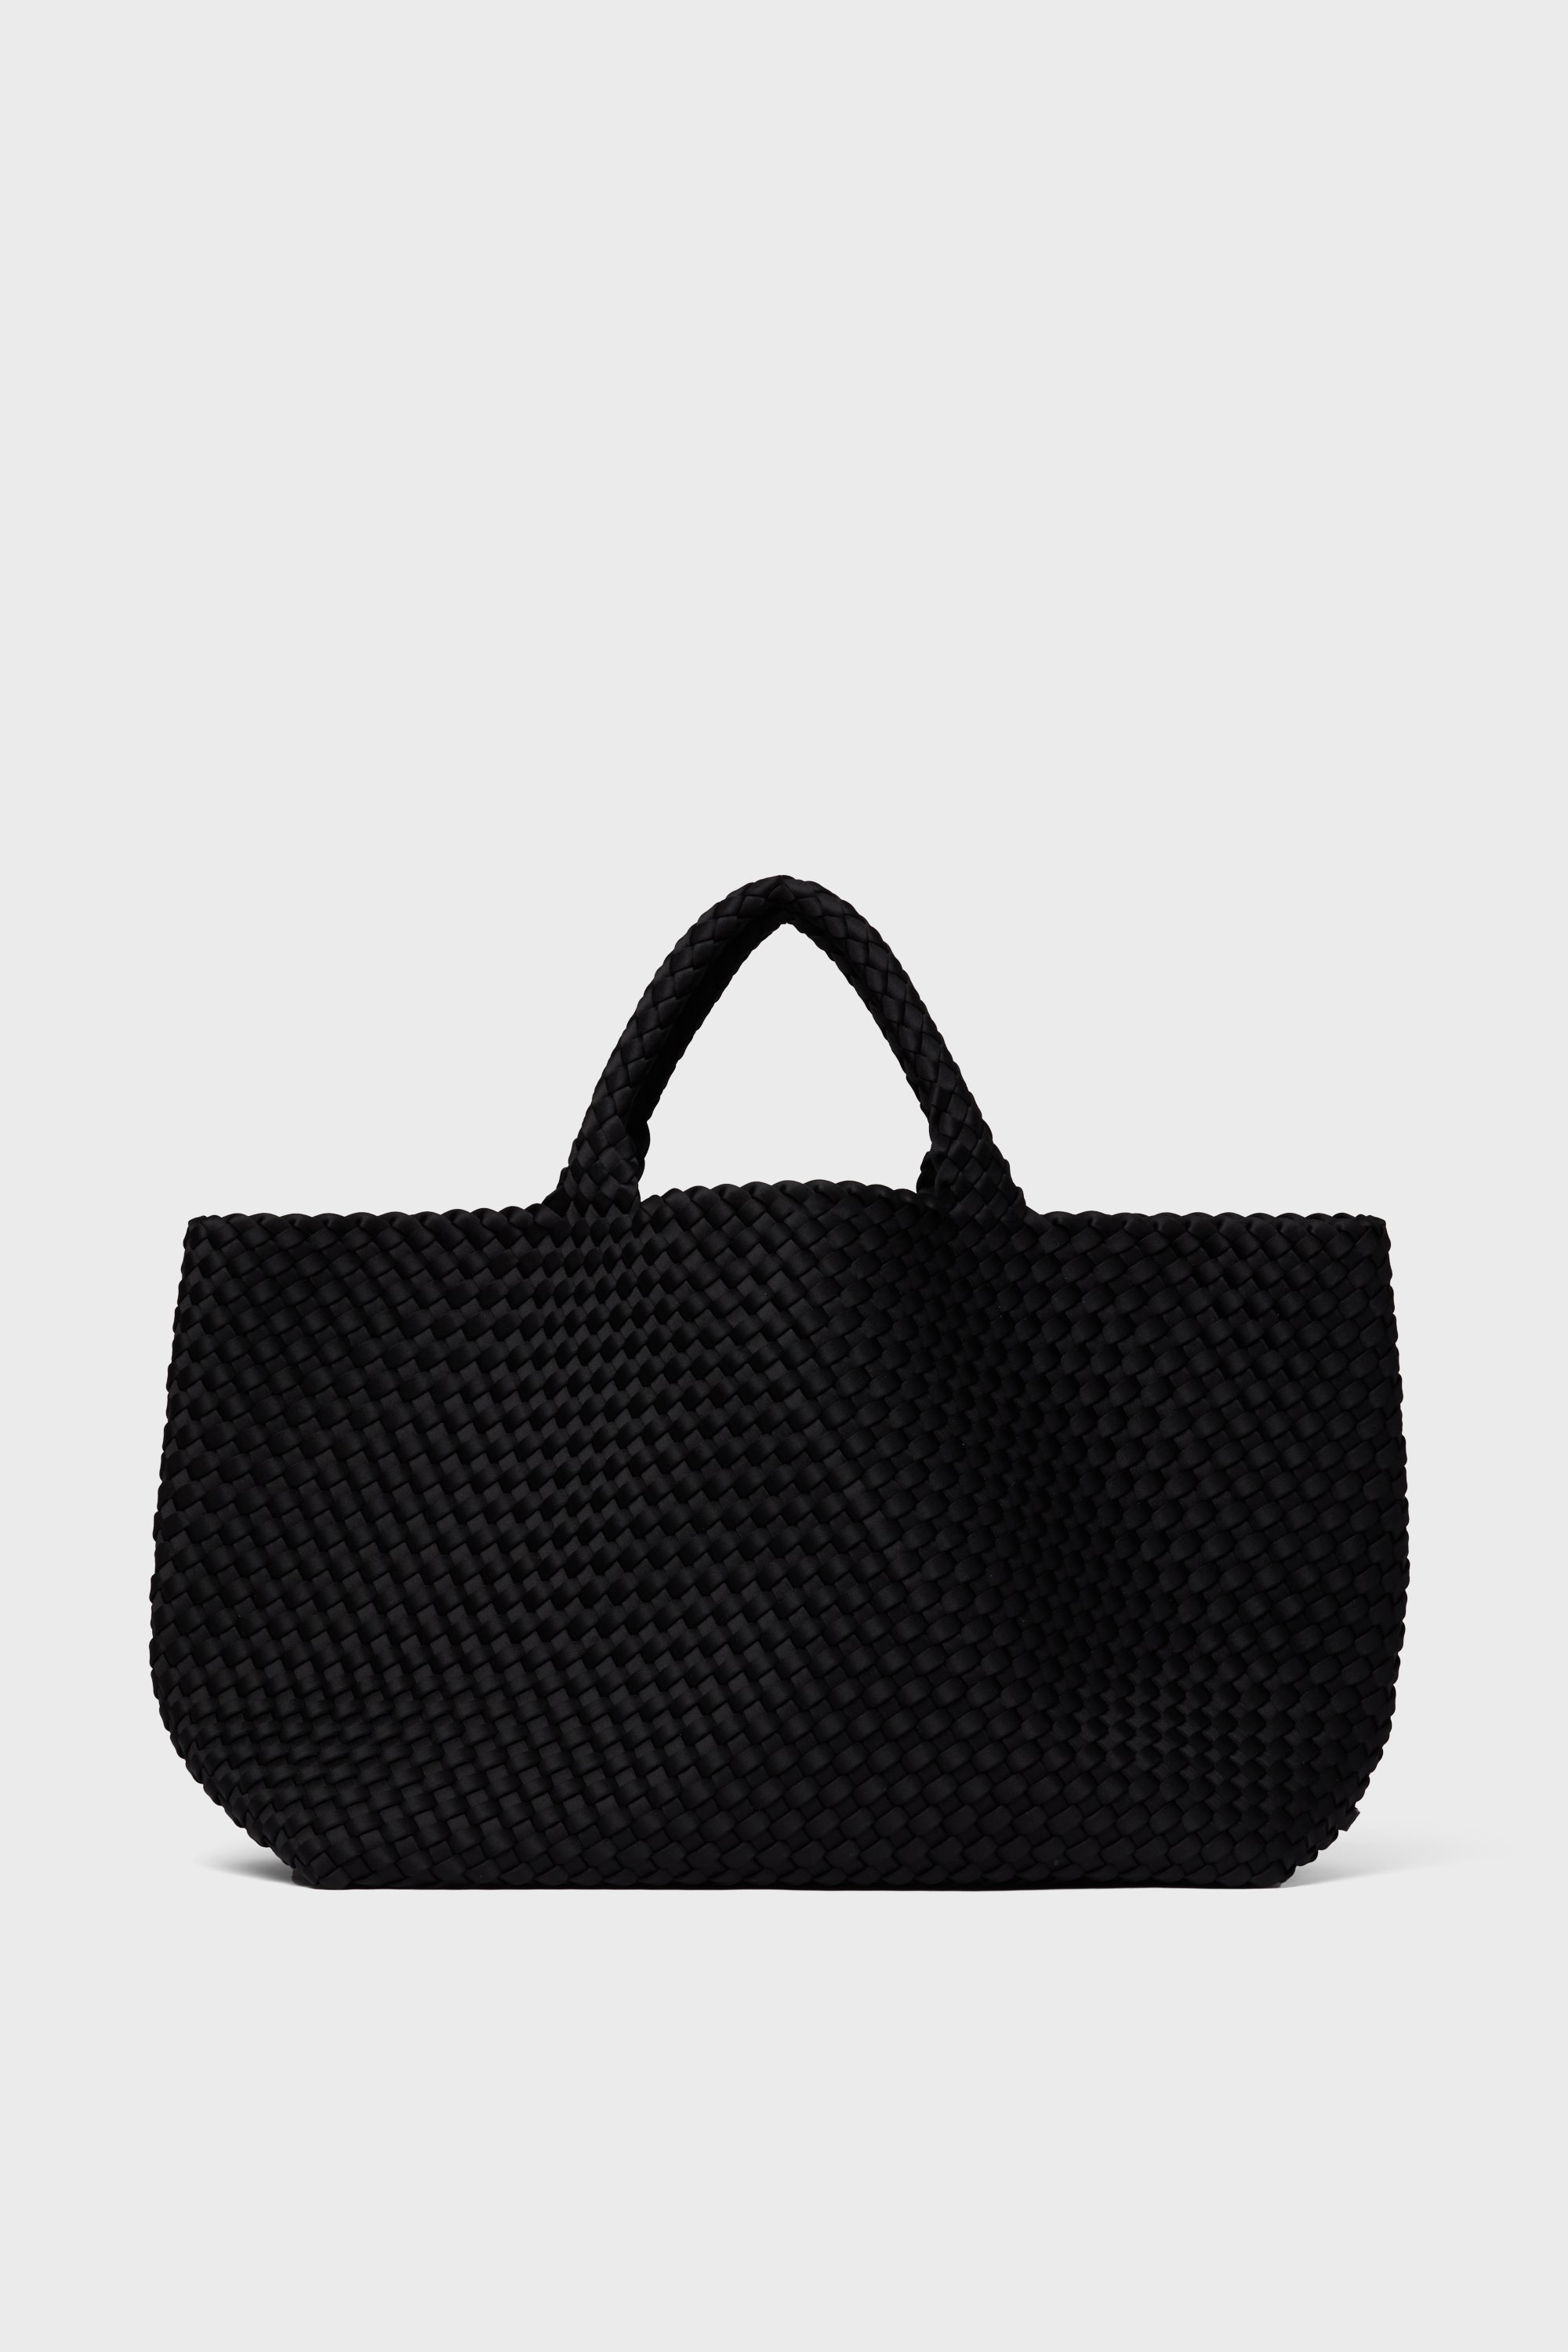 Neoprene bags are perfect for everyone. Shop now. Link in bio